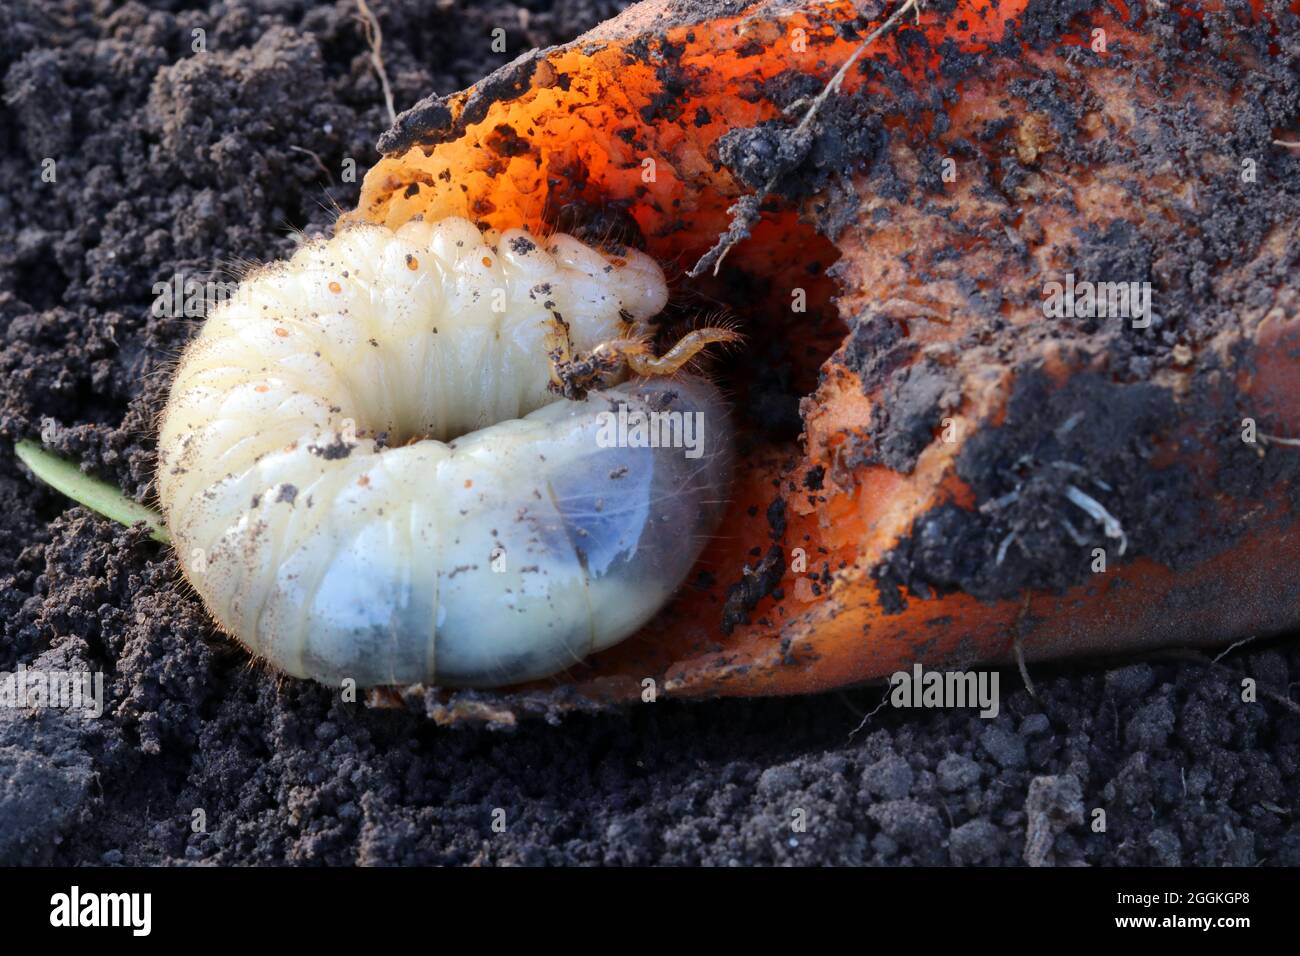 Larva of the May beetle eats carrot. Common Cockchafer or May Bug inside carrot. Melolontha. Stock Photo